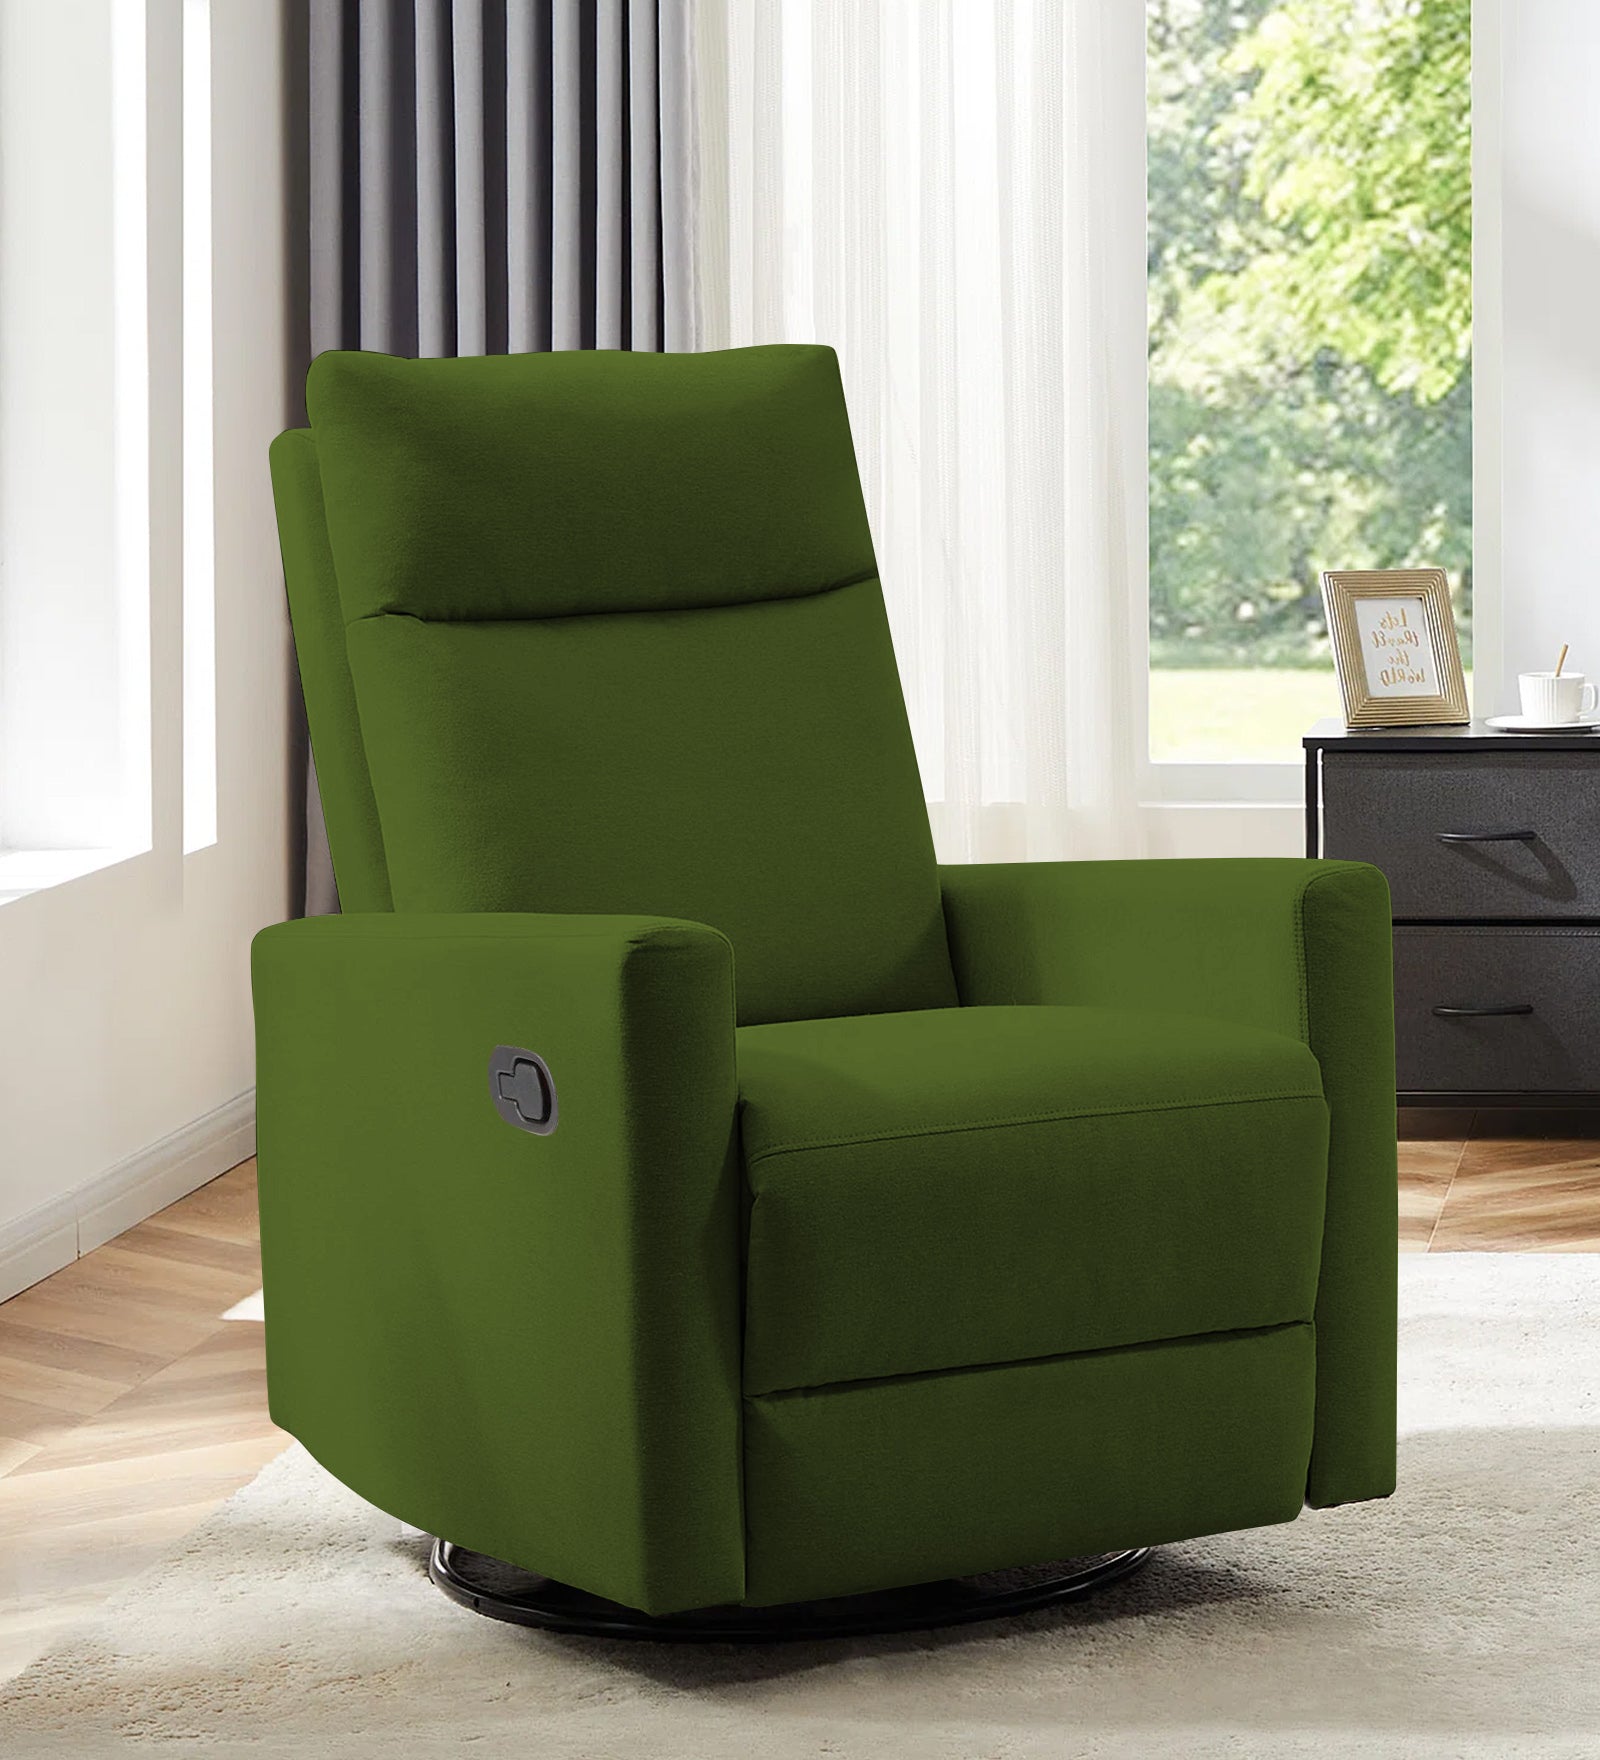 Zura Fabric Manual 1 Seater Recliner In Olive Green Colour